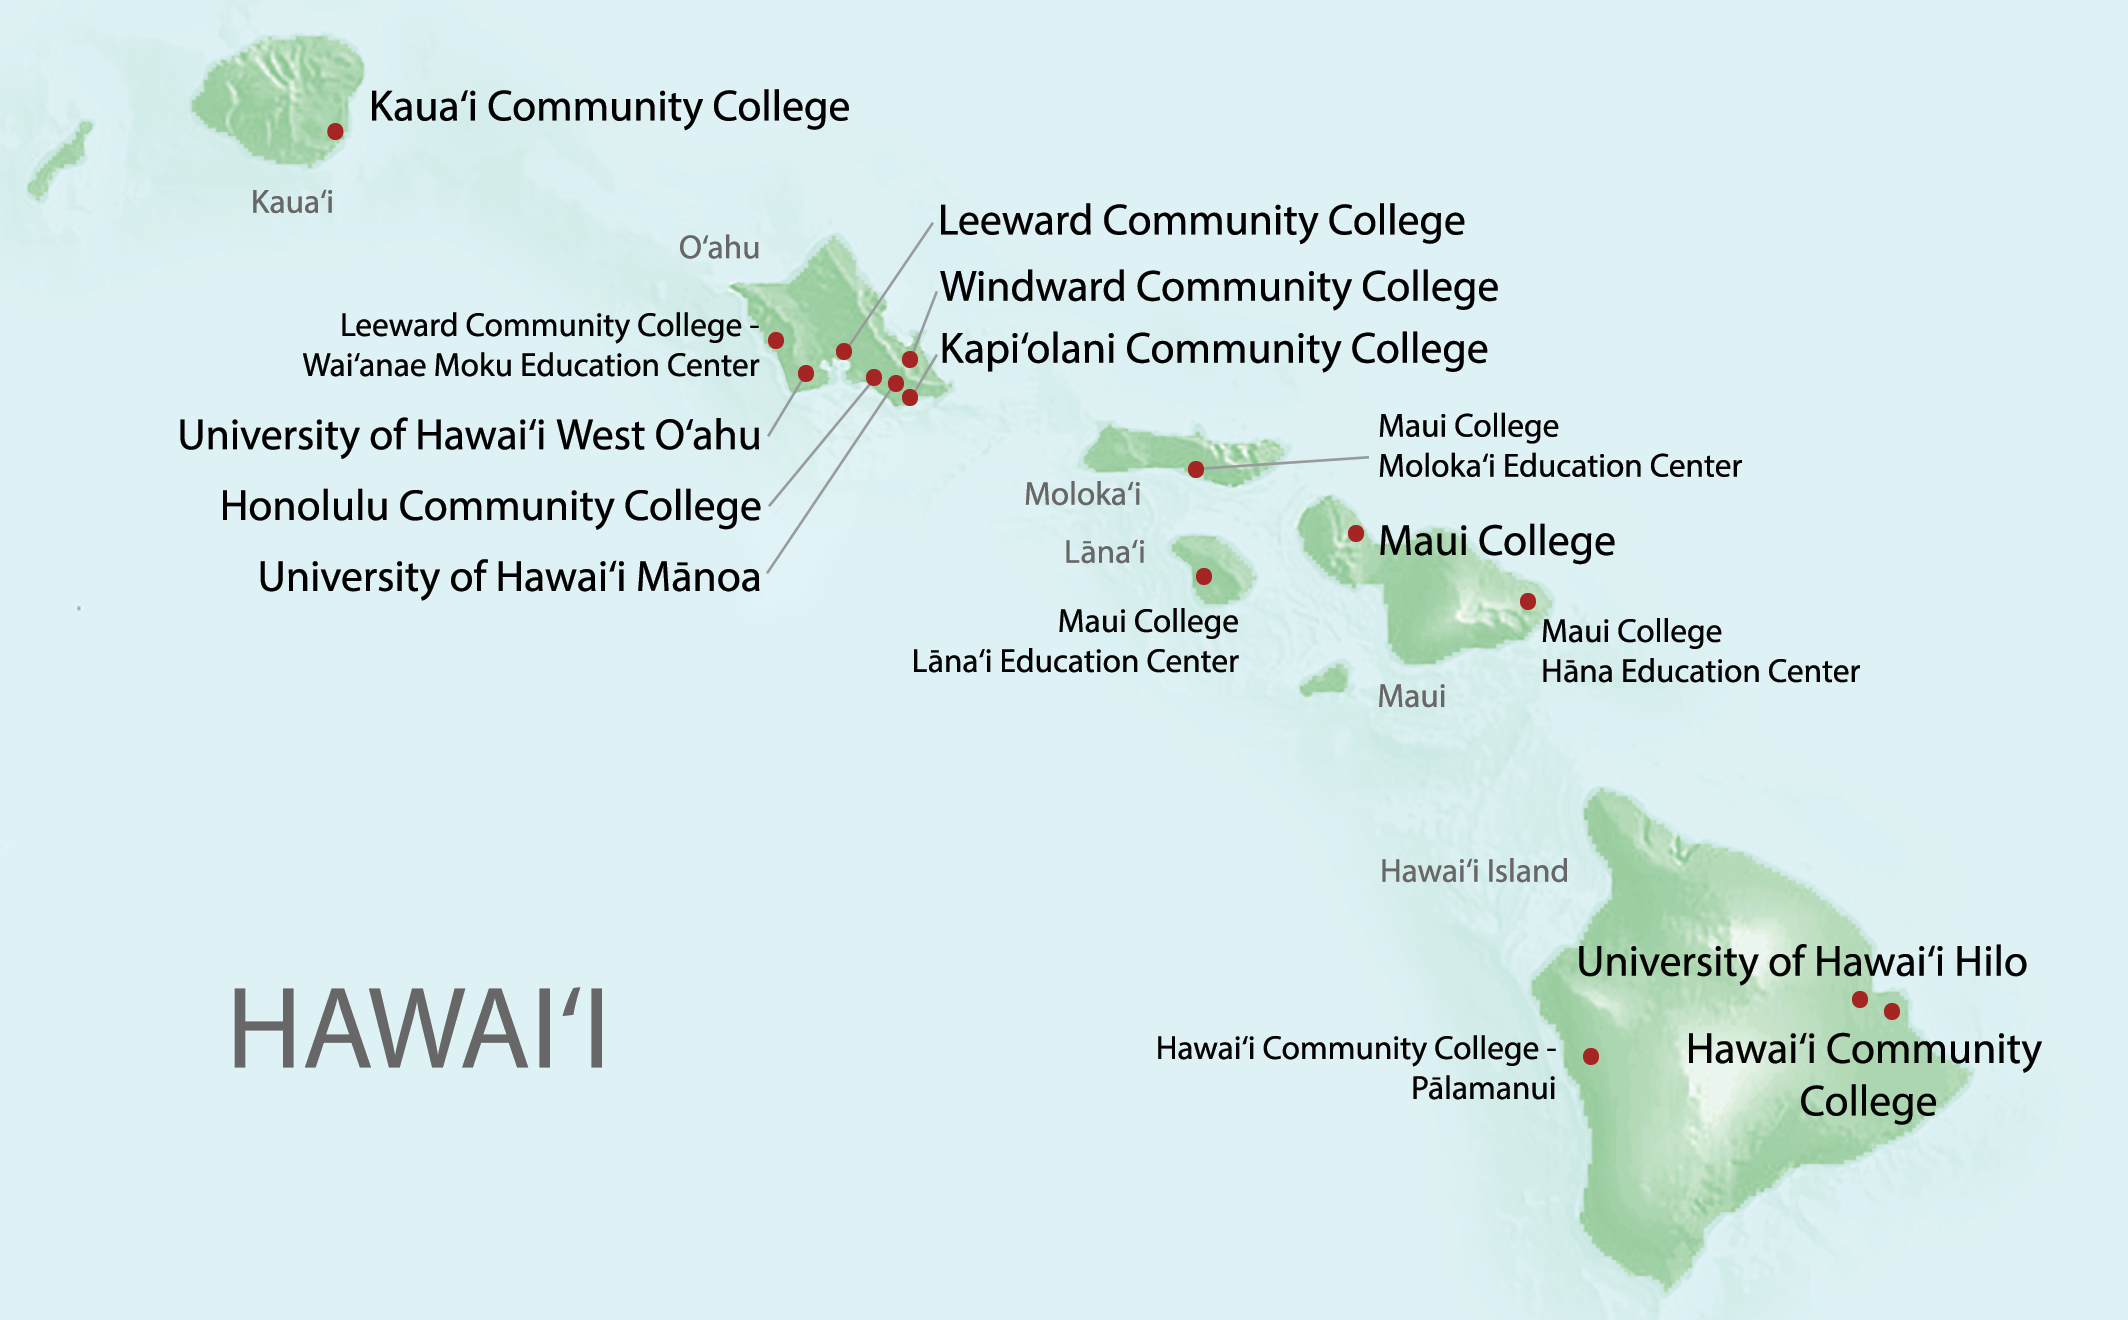 Map of 草莓社区 campuses to show on what island and where each university, college and education center is located.